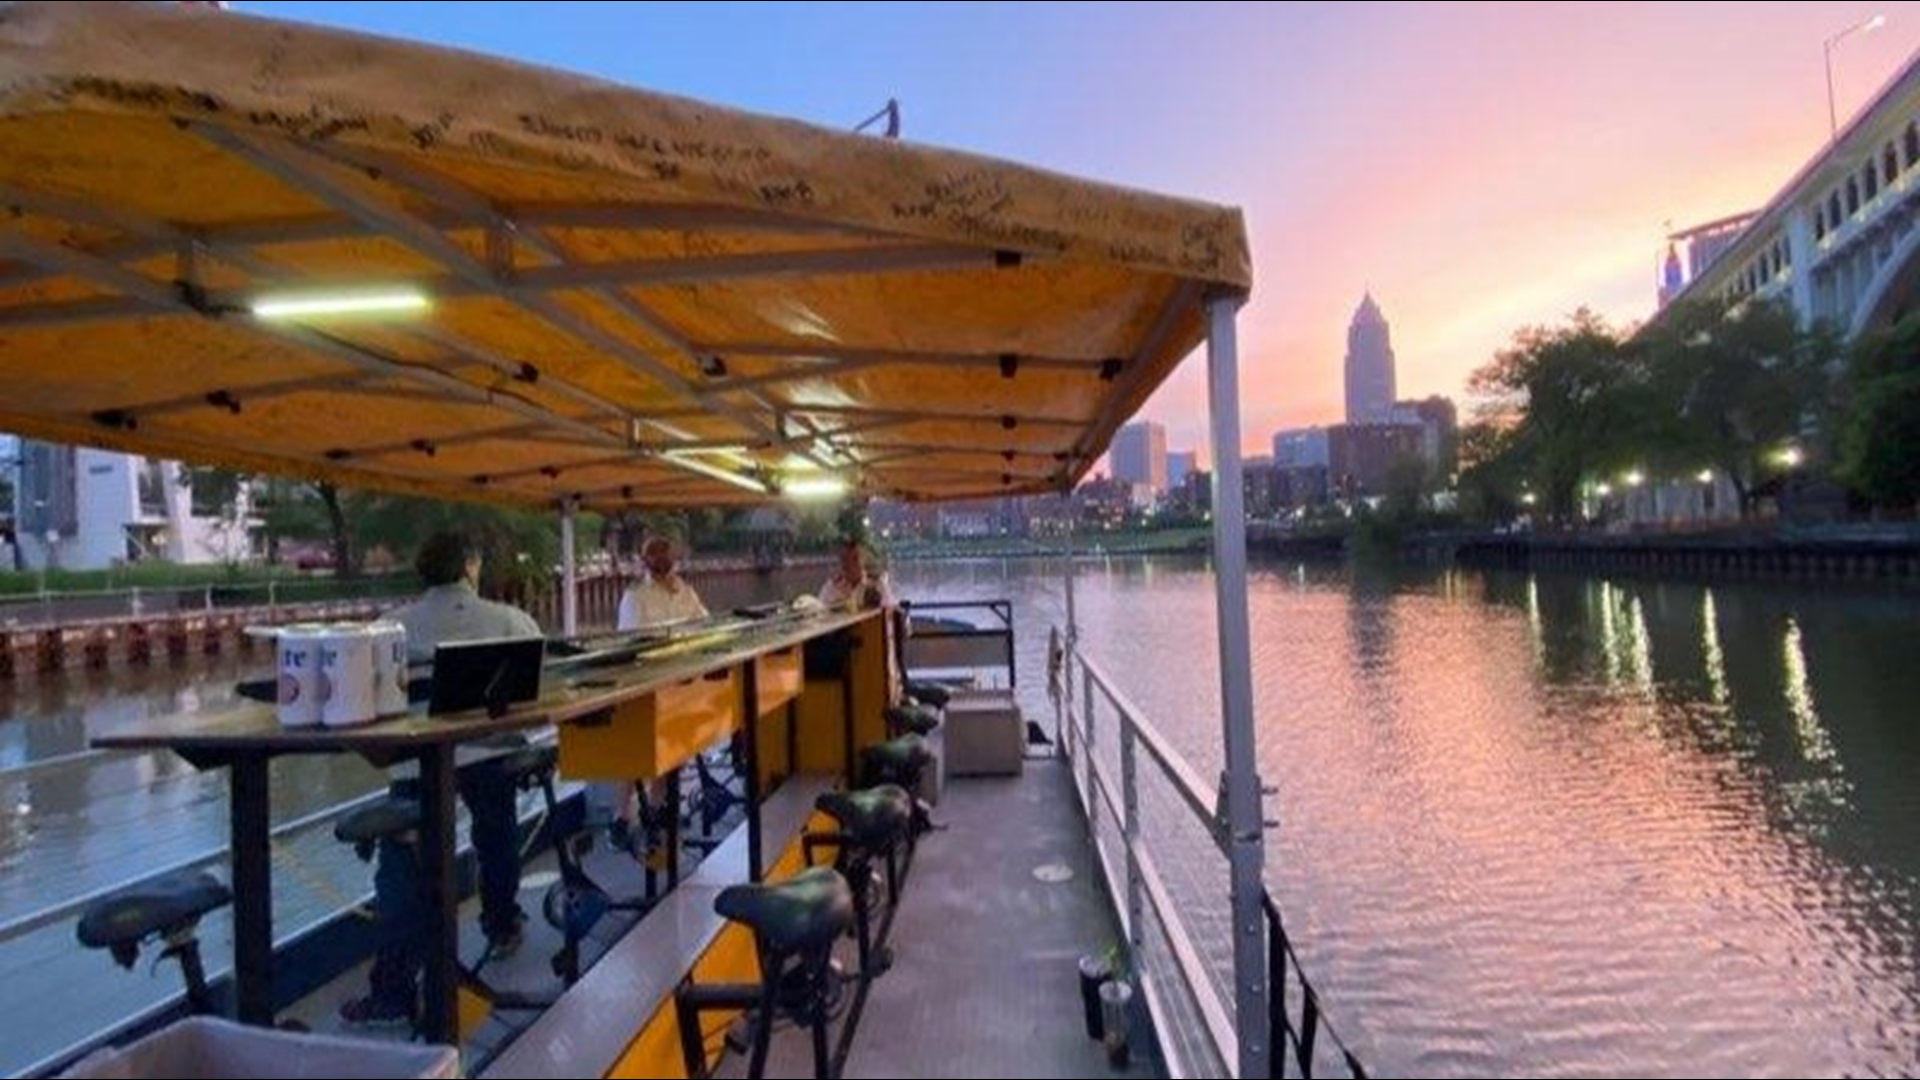 BrewBoat is back for another year of beer-filled adventures along the Cuyahoga River in Cleveland.